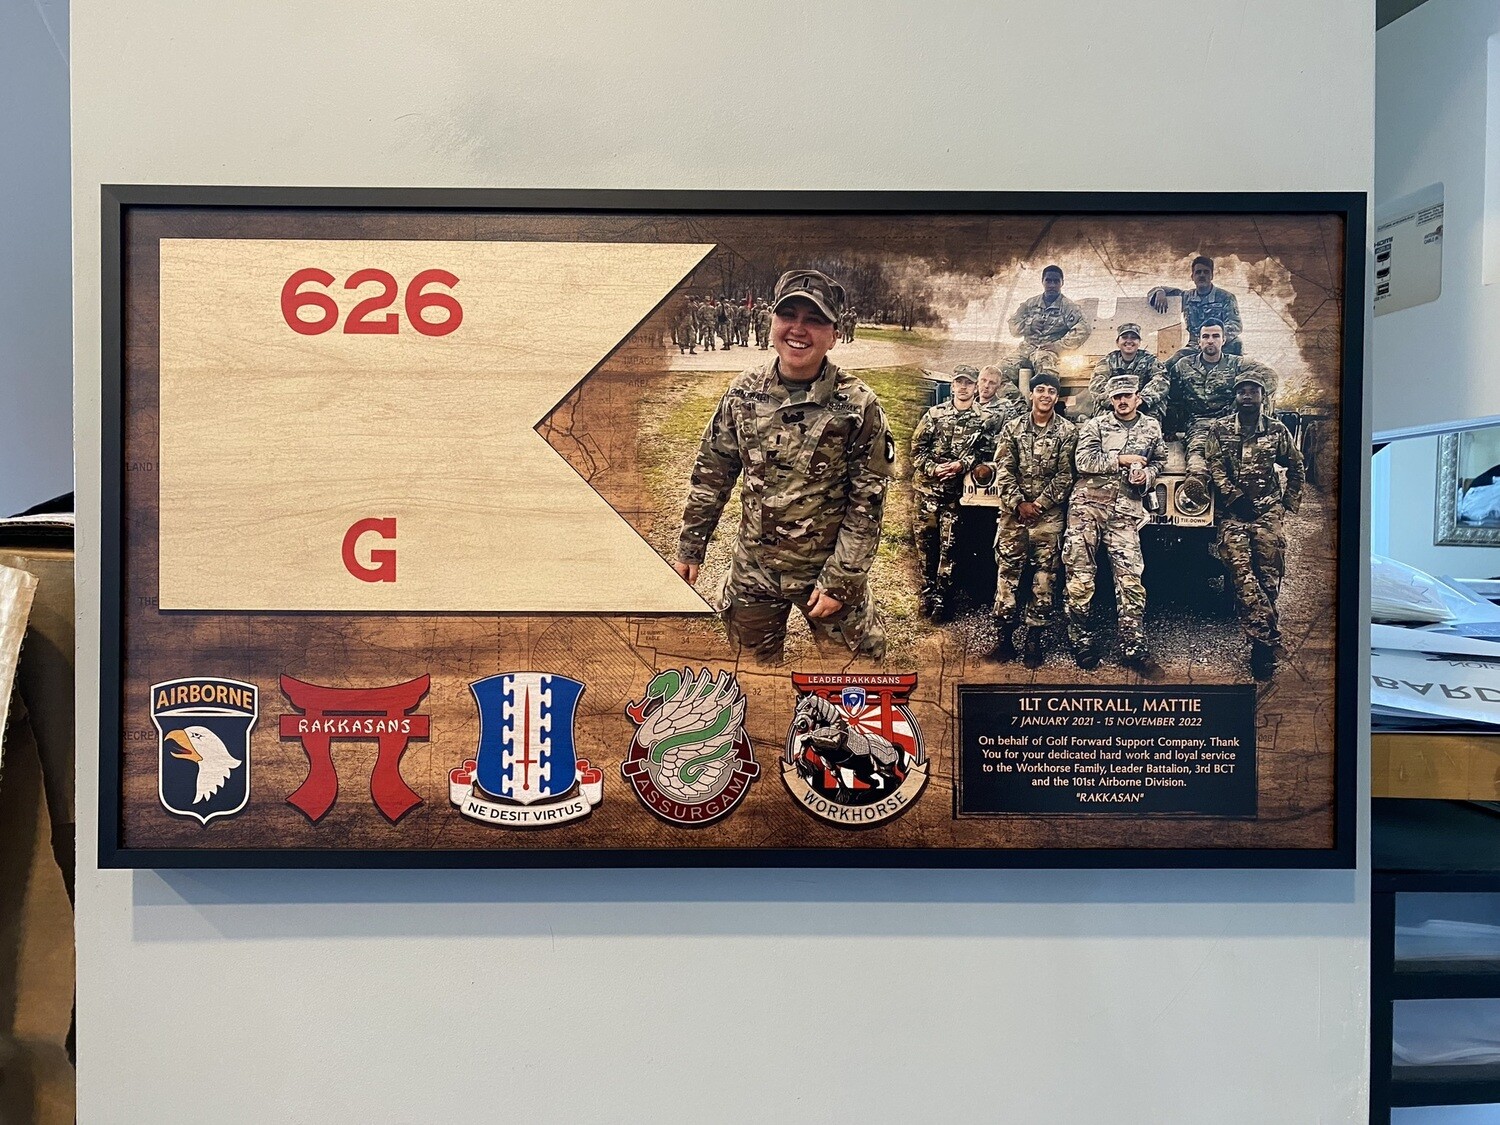 G Co "Workhorse" 626 BEB Guidon and Photo Plaque - 28.25"x15.25"